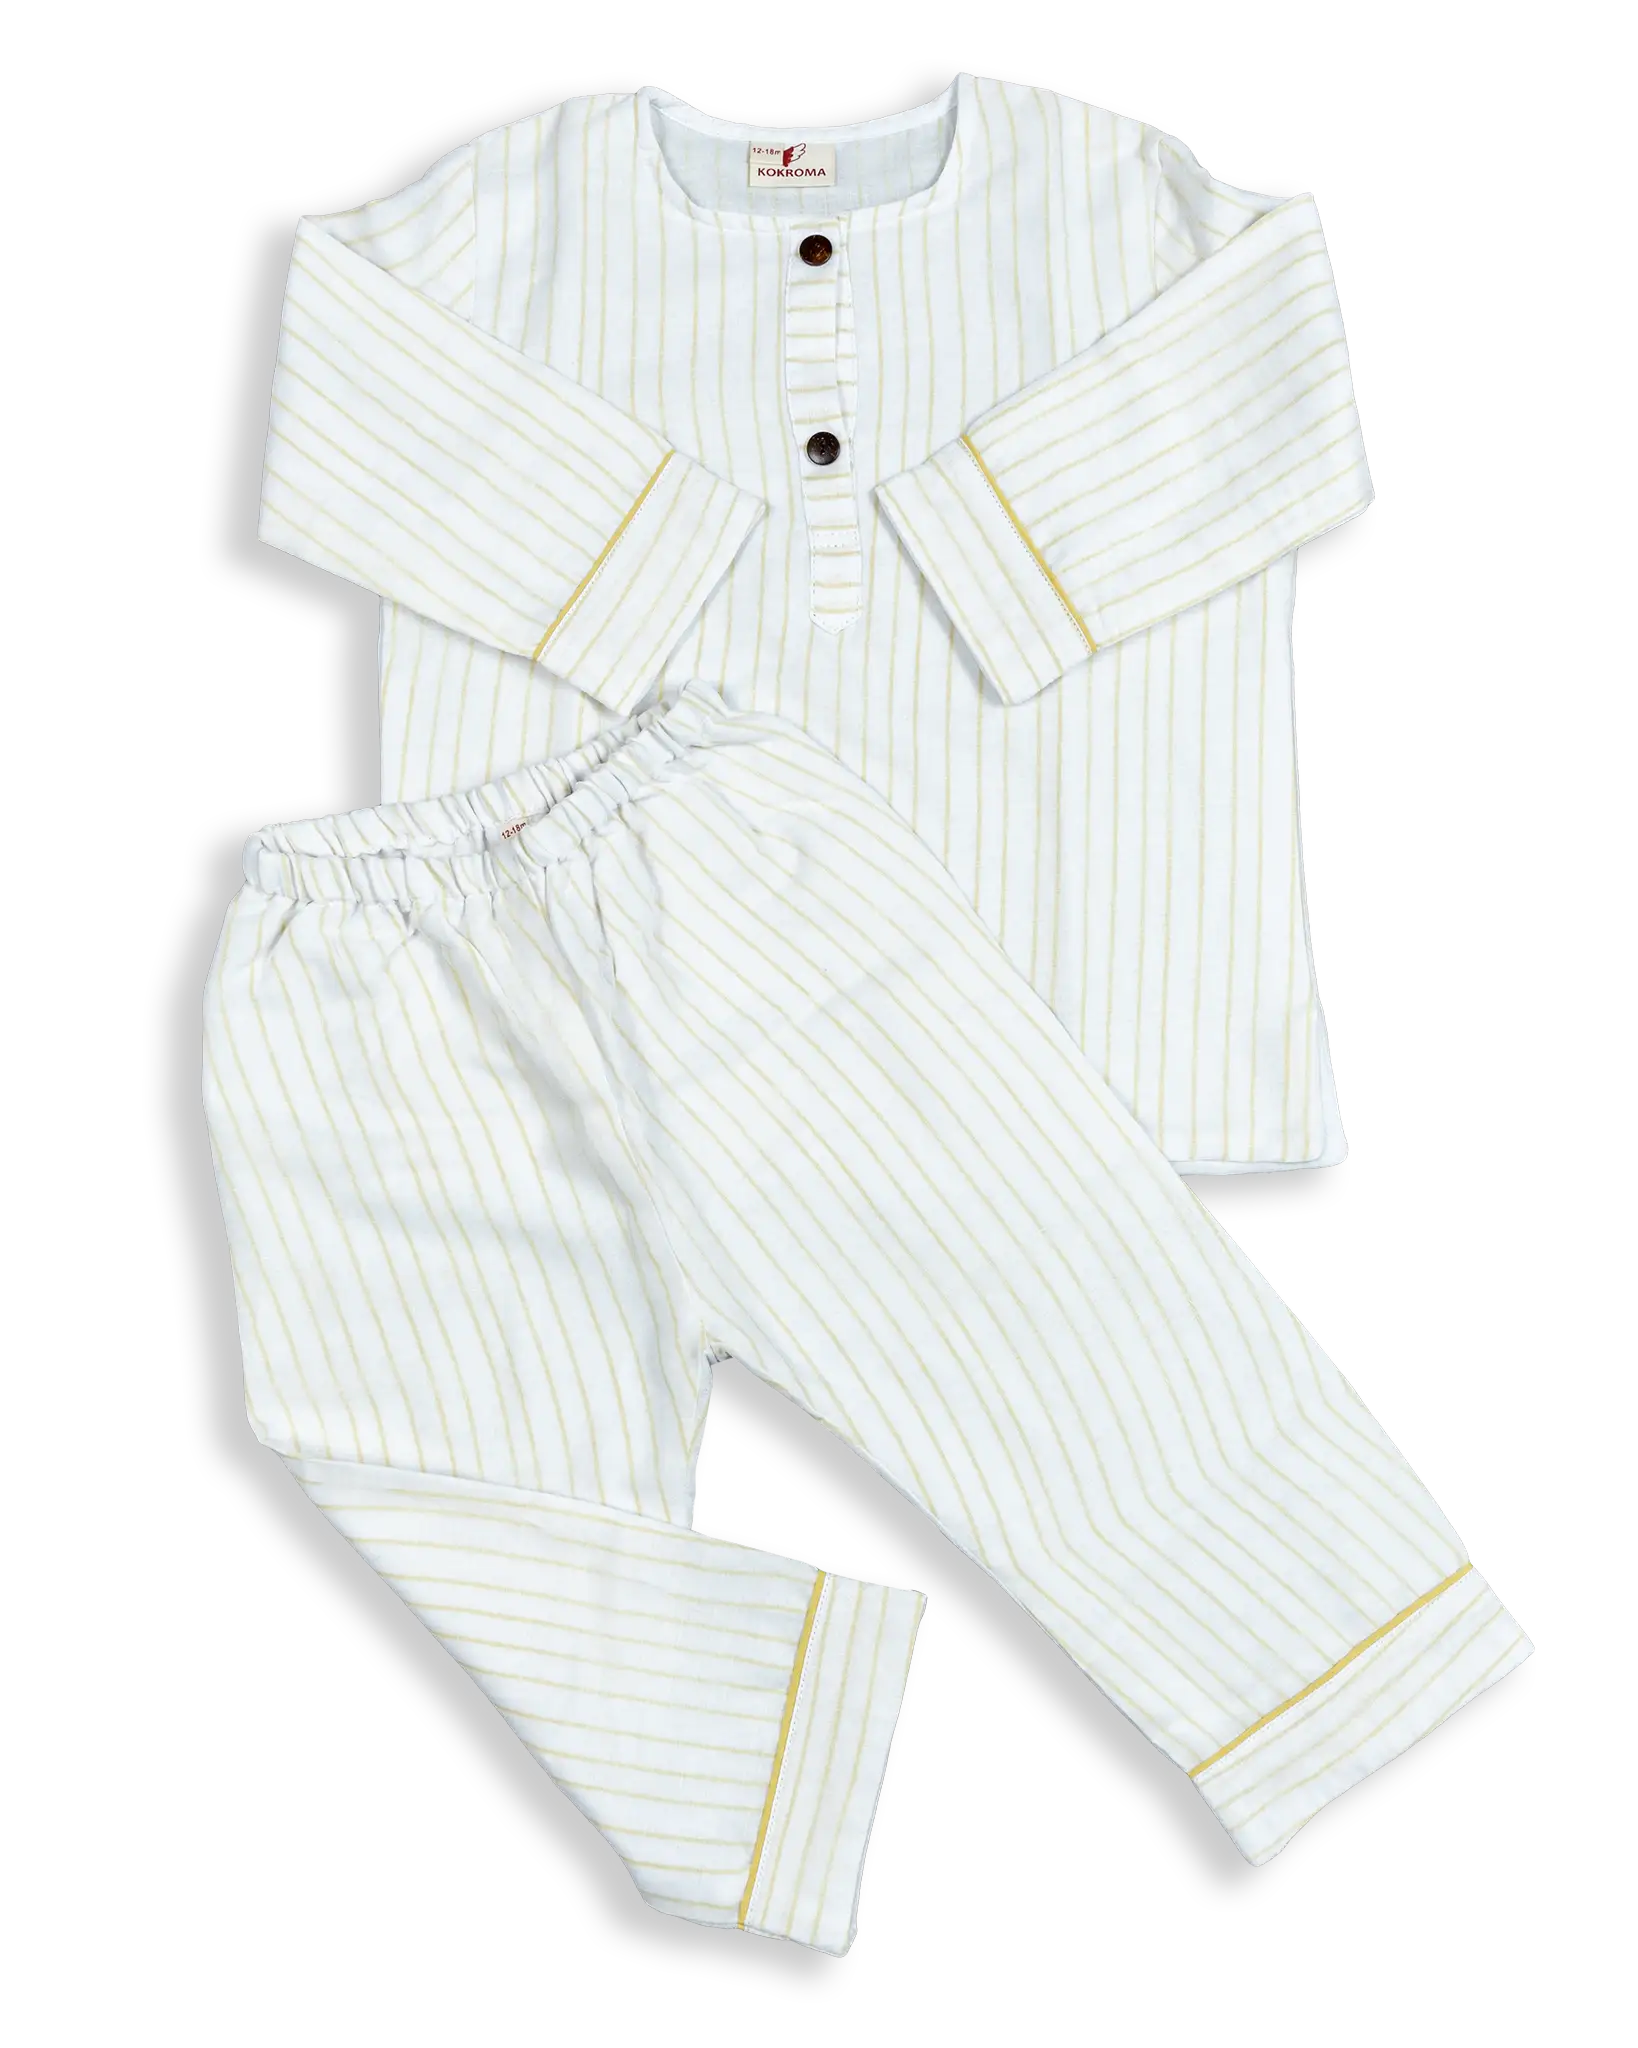 Our Mulmul Pyjamas For Girls and Boys are made with the finest cotton fabric, with 3 layers for breathability and comfort. Perfect for children of all ages, they make a great choice for a good night's sleep. Enjoy the soft, lightweight feel of our Mulmul Pyjamas for long-lasting comfort.